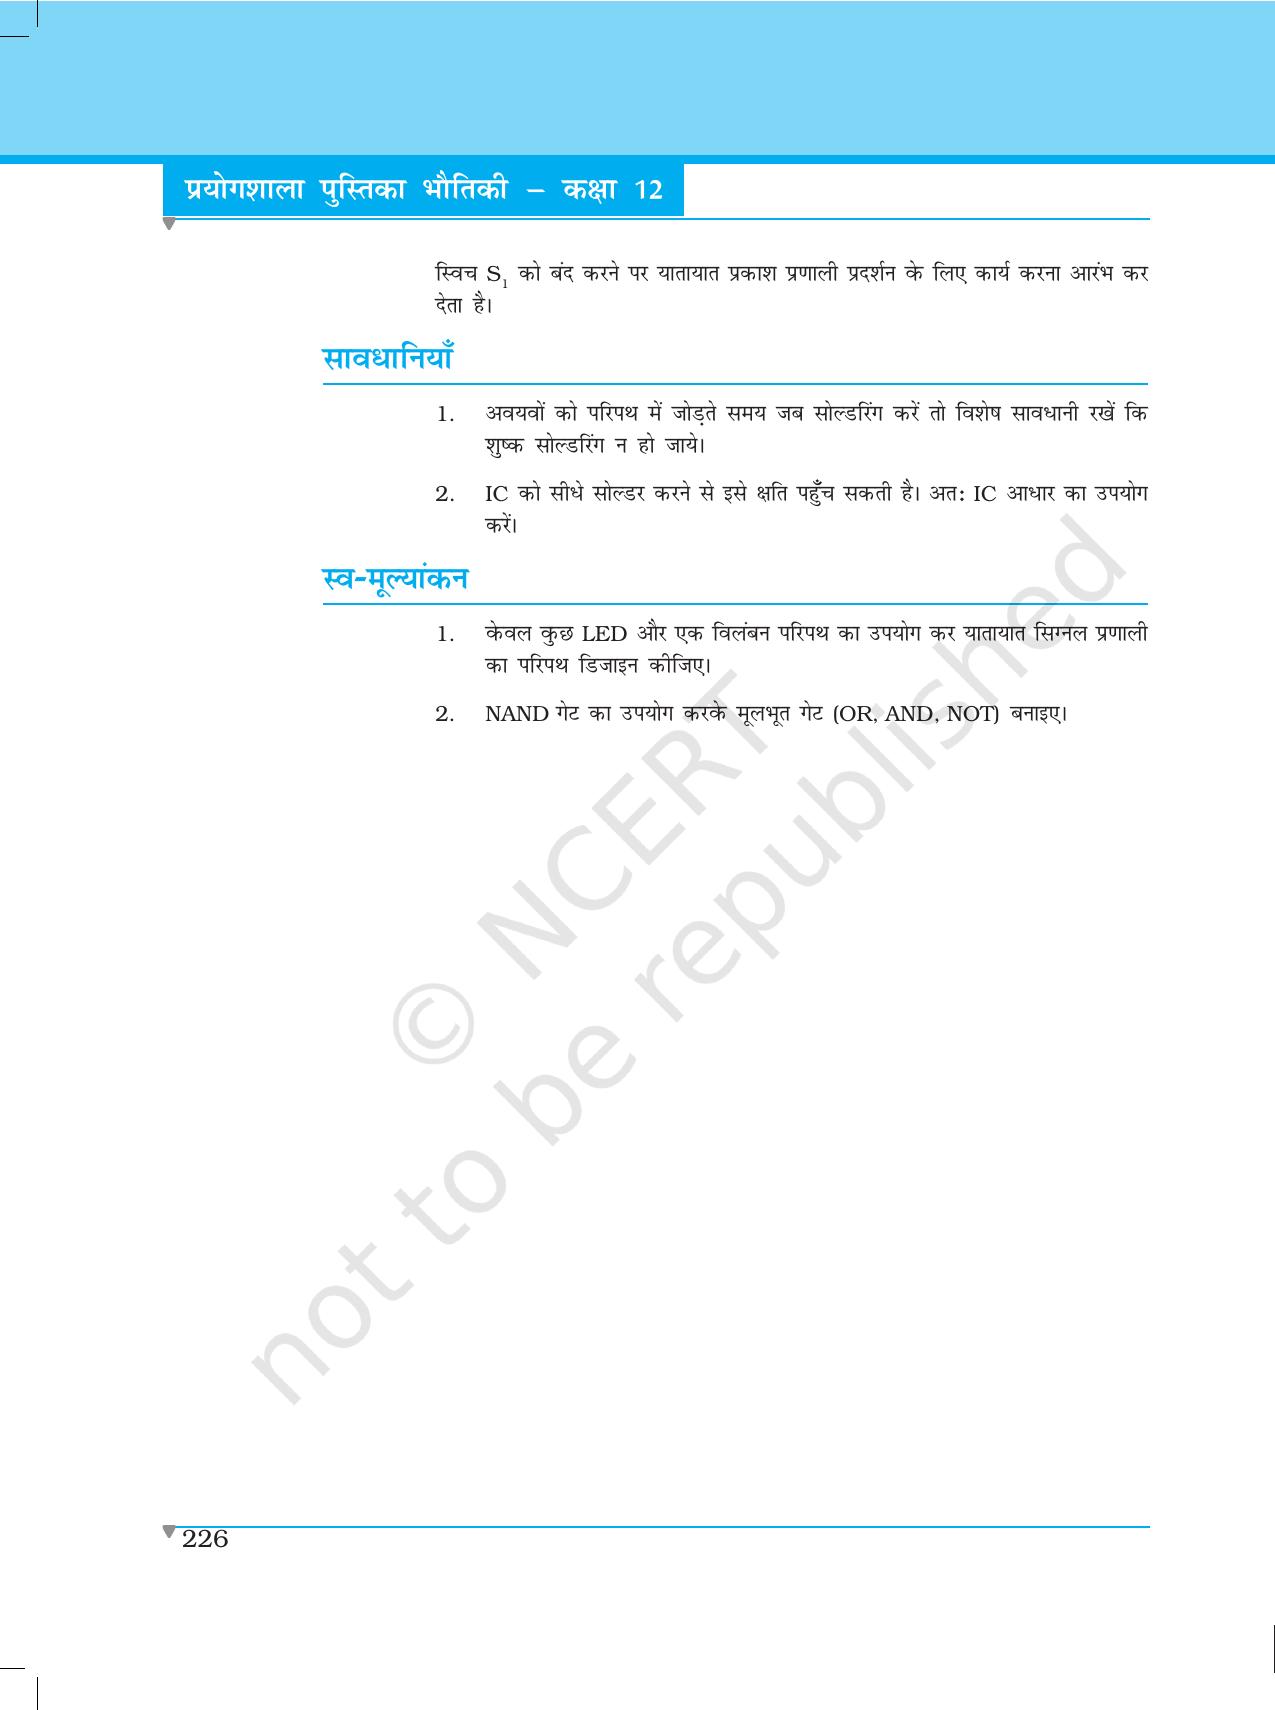 NCERT Laboratory Manuals for Class XII भौतिकी - परियोजना (1 - 7) - Page 20